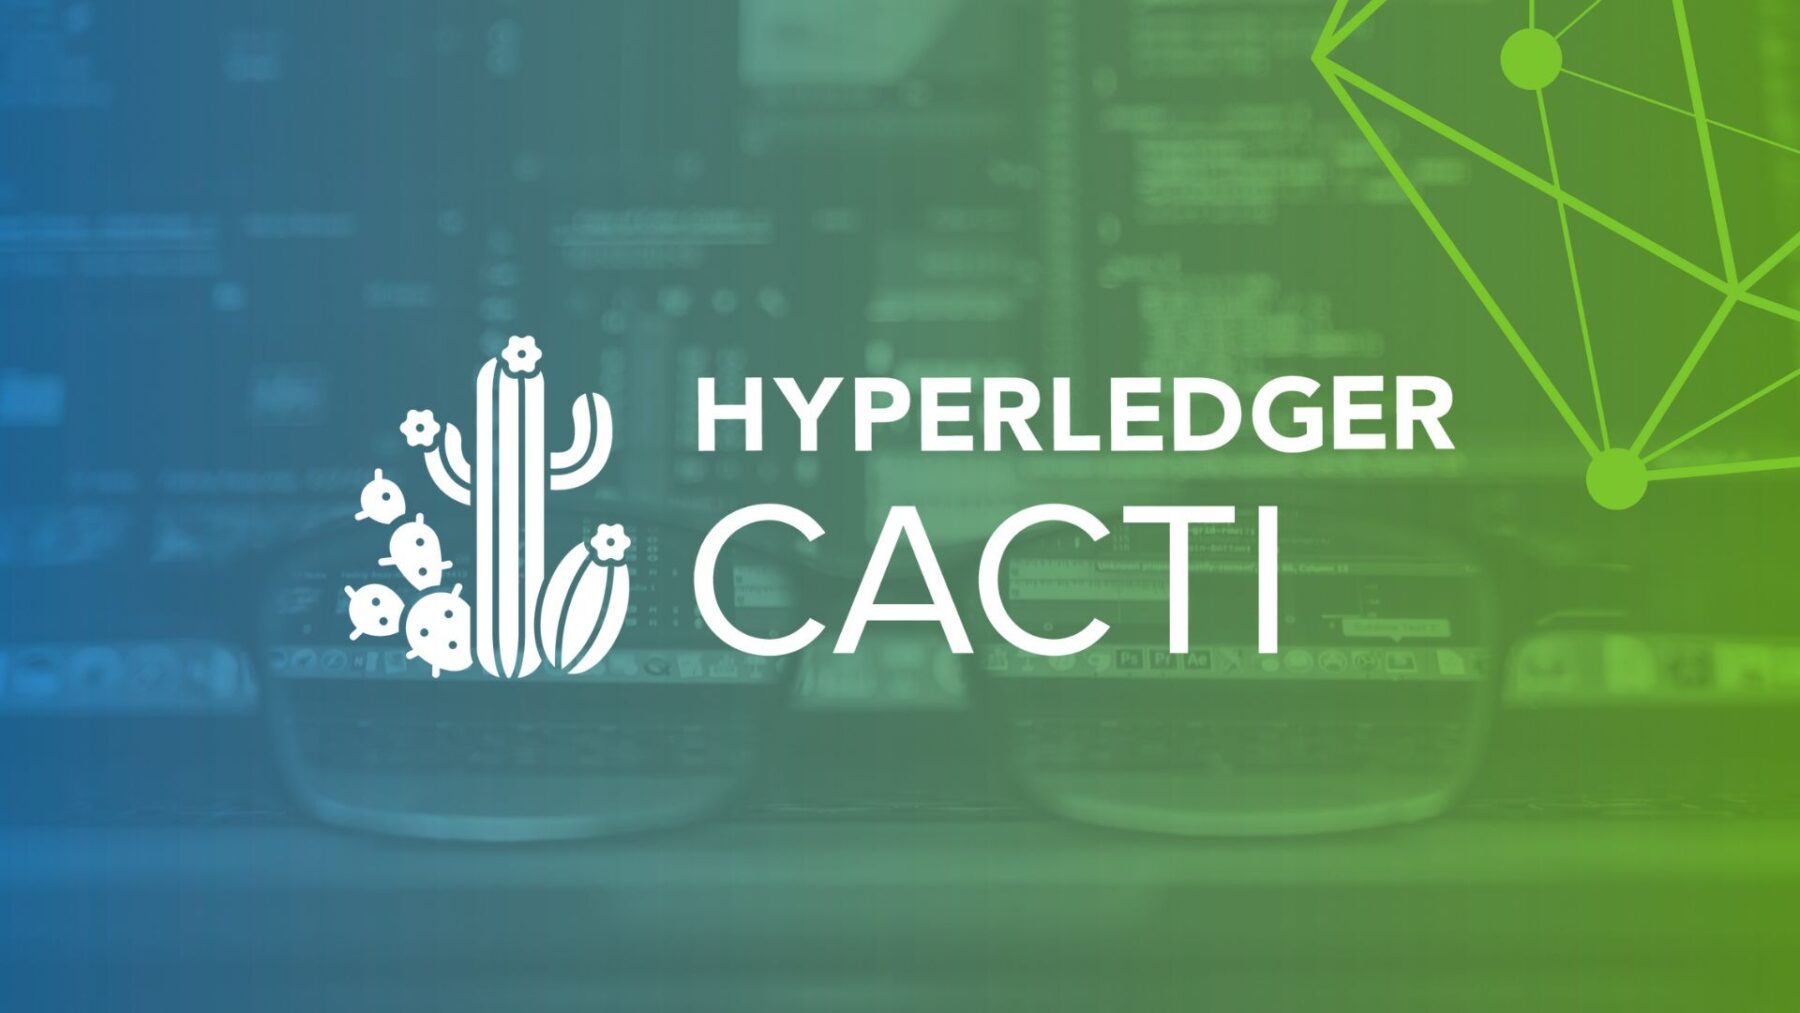 Hyperledger Cactus: Release V1 on the Road to General Blockchain Integration